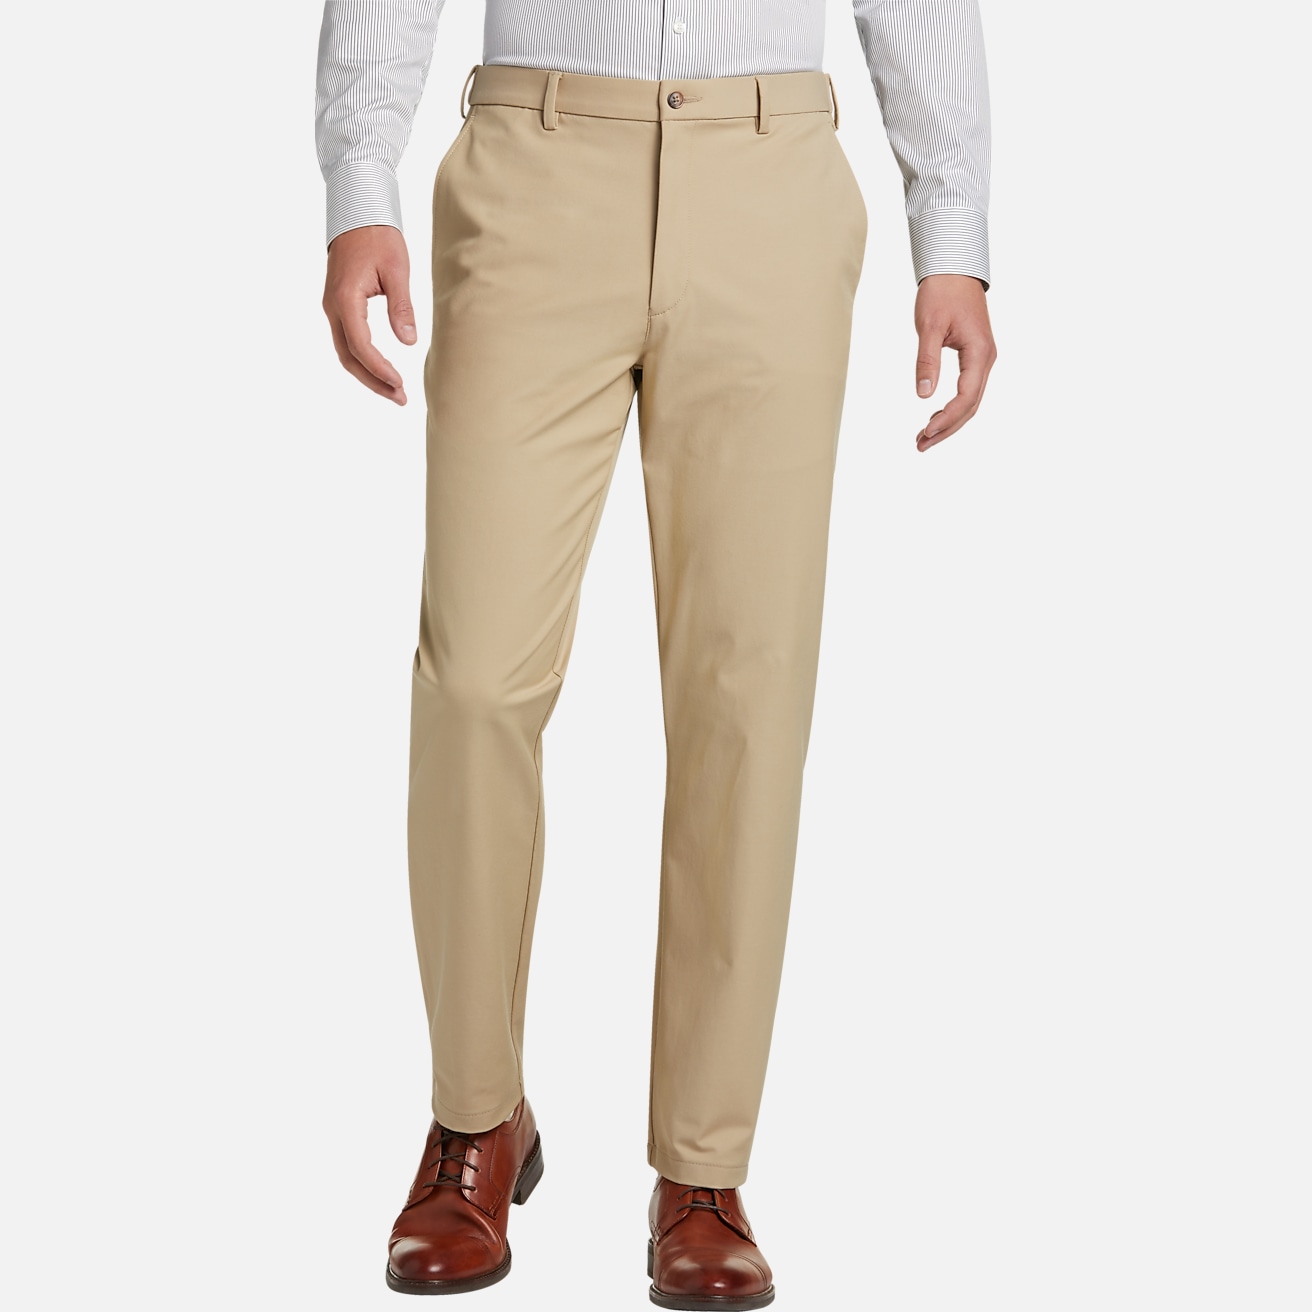 Beige Wool Dress Pants Outfits For Men (45 ideas & outfits)